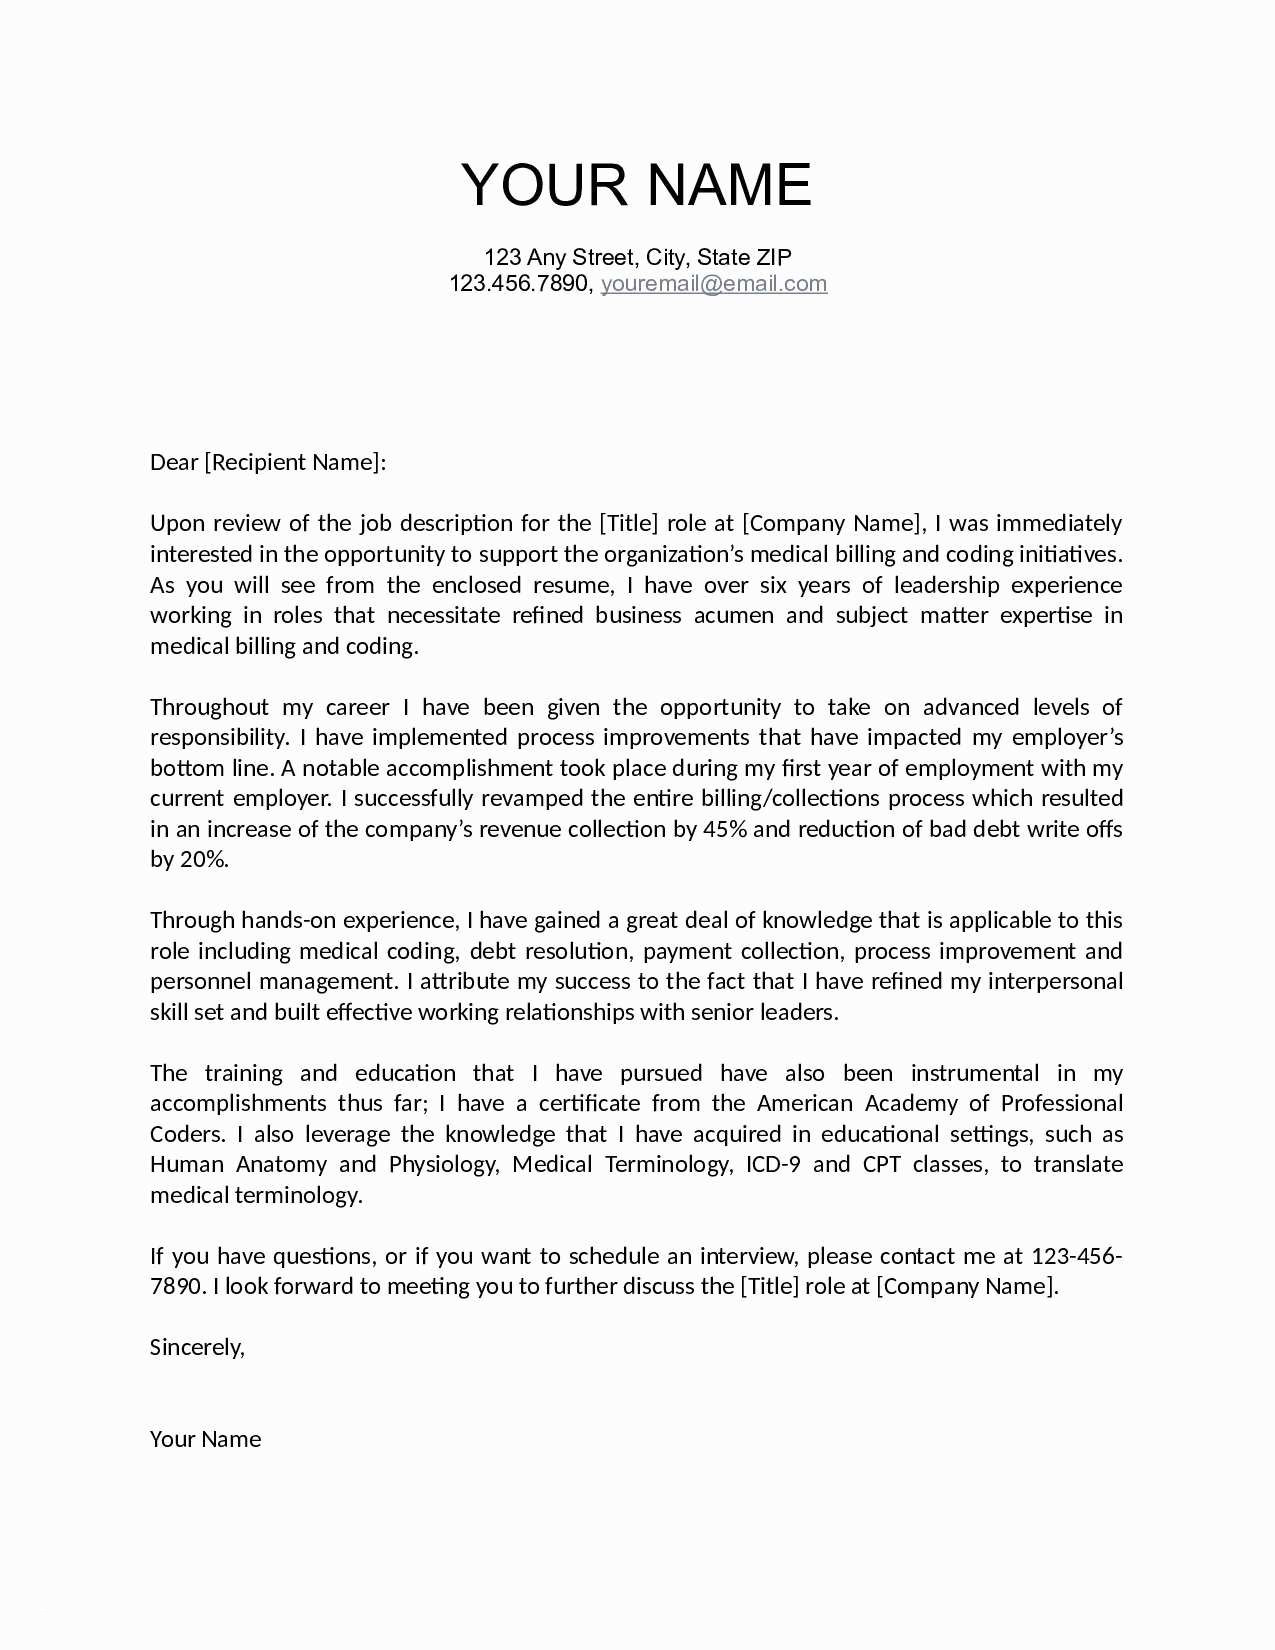 Impressive Cover Letter Template - Resume and Cover Letters Templates Awesome Job Fer Letter Template